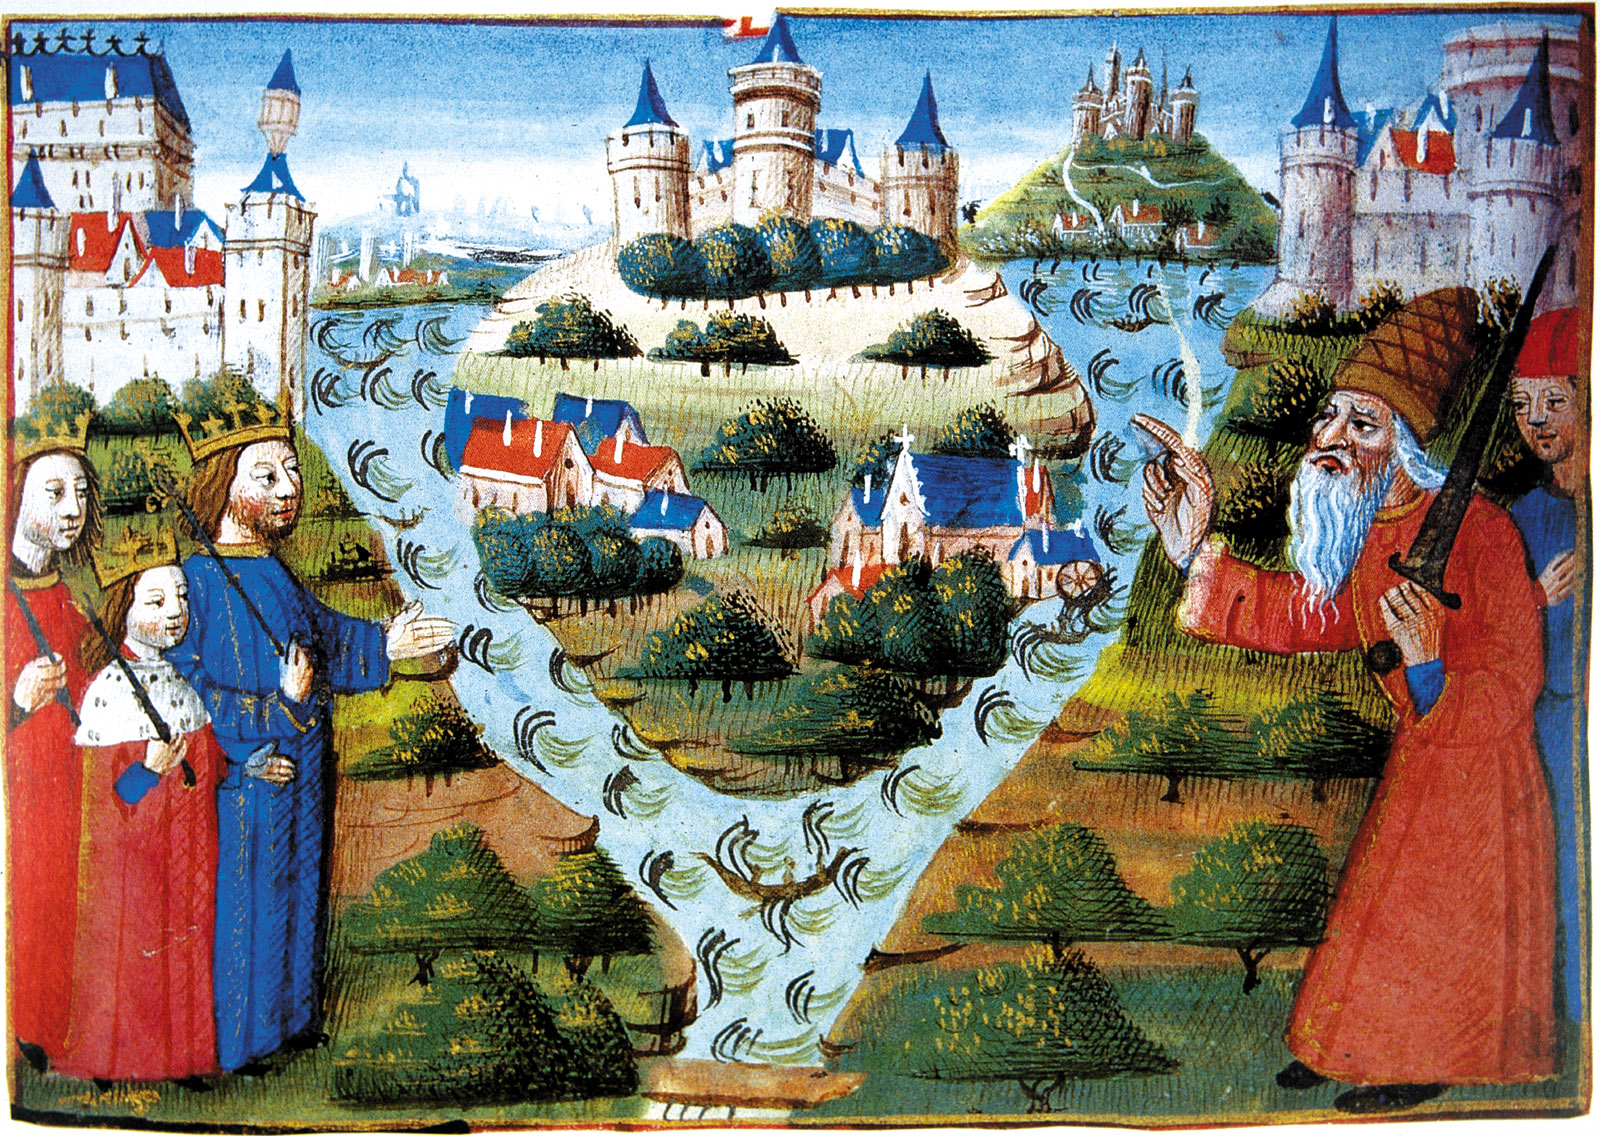 Louis the Pious (right) blessing the division of the Carolingian Empire in 843 into West Francia, Lotharingia, and East Francia; from the Chroniques des rois de France, fifteenth century